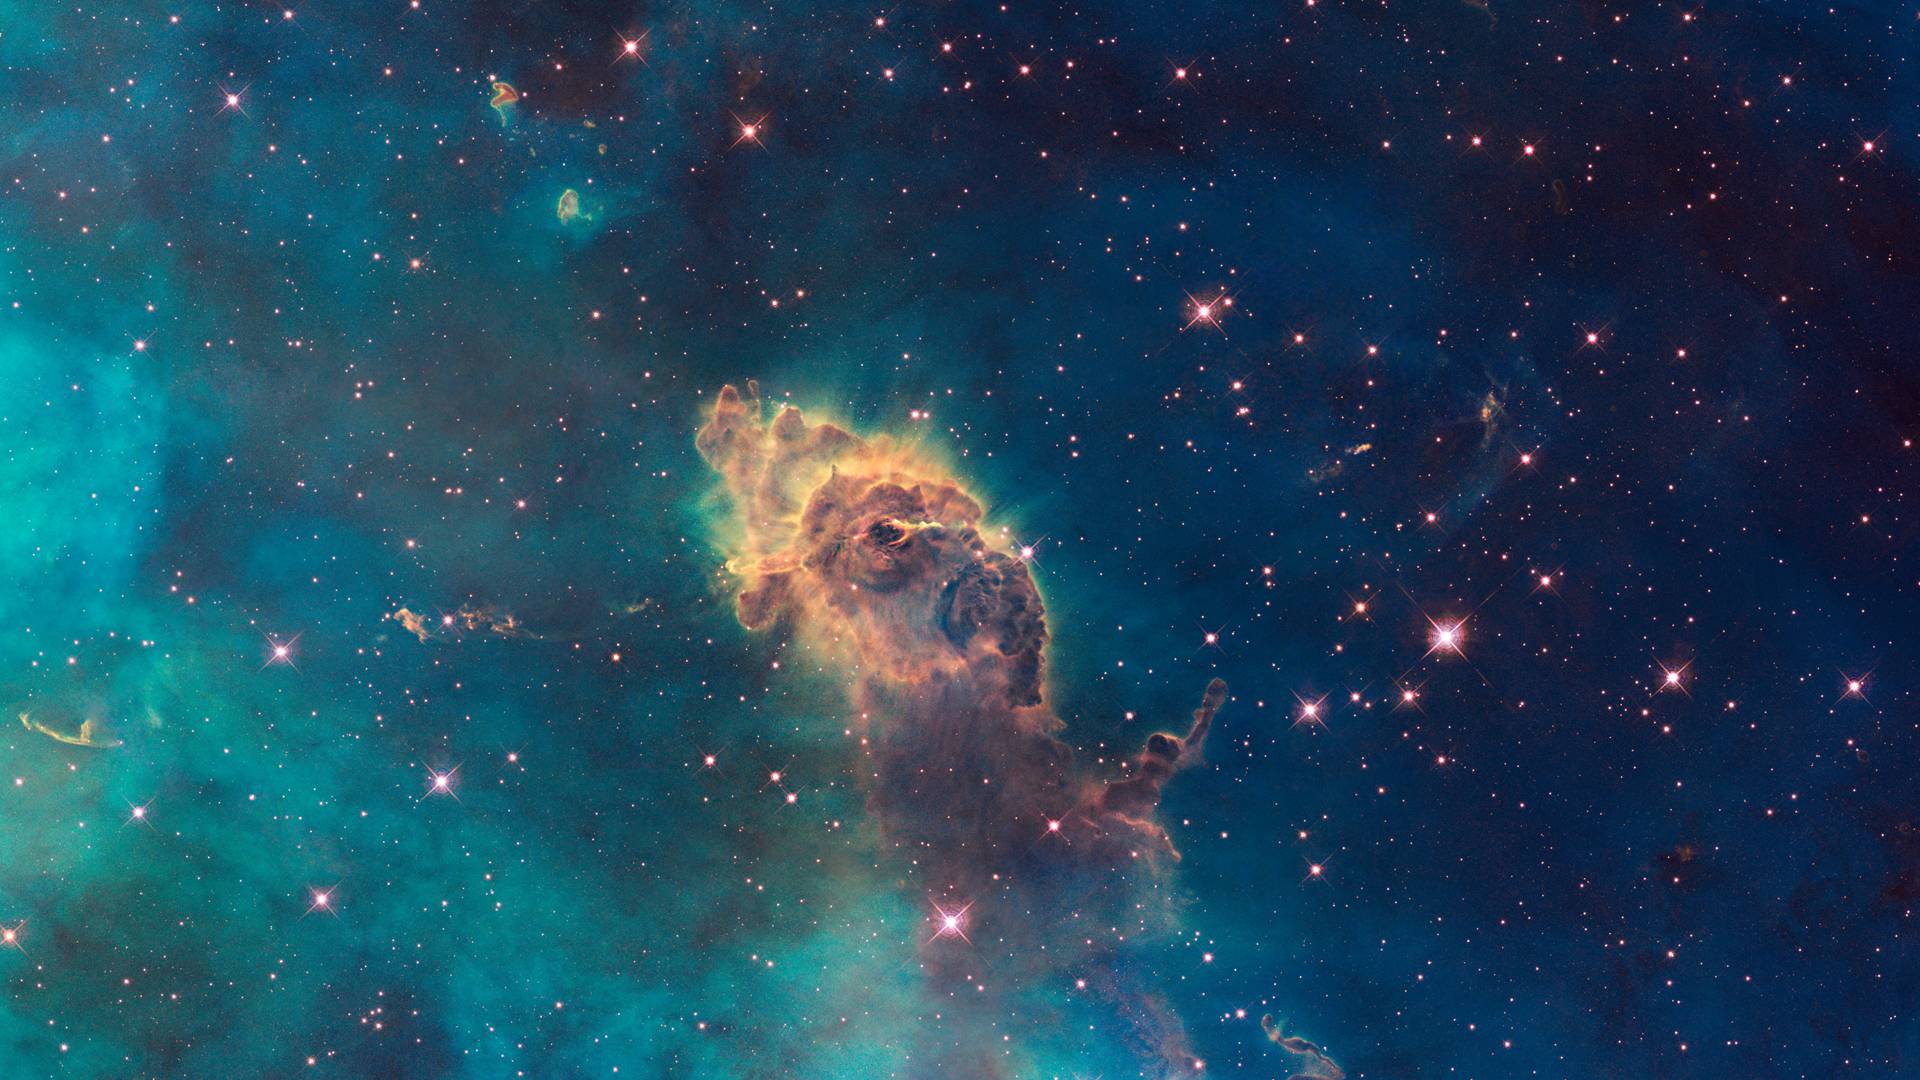 Space stars nebula gas wallpaper - - High Quality and other